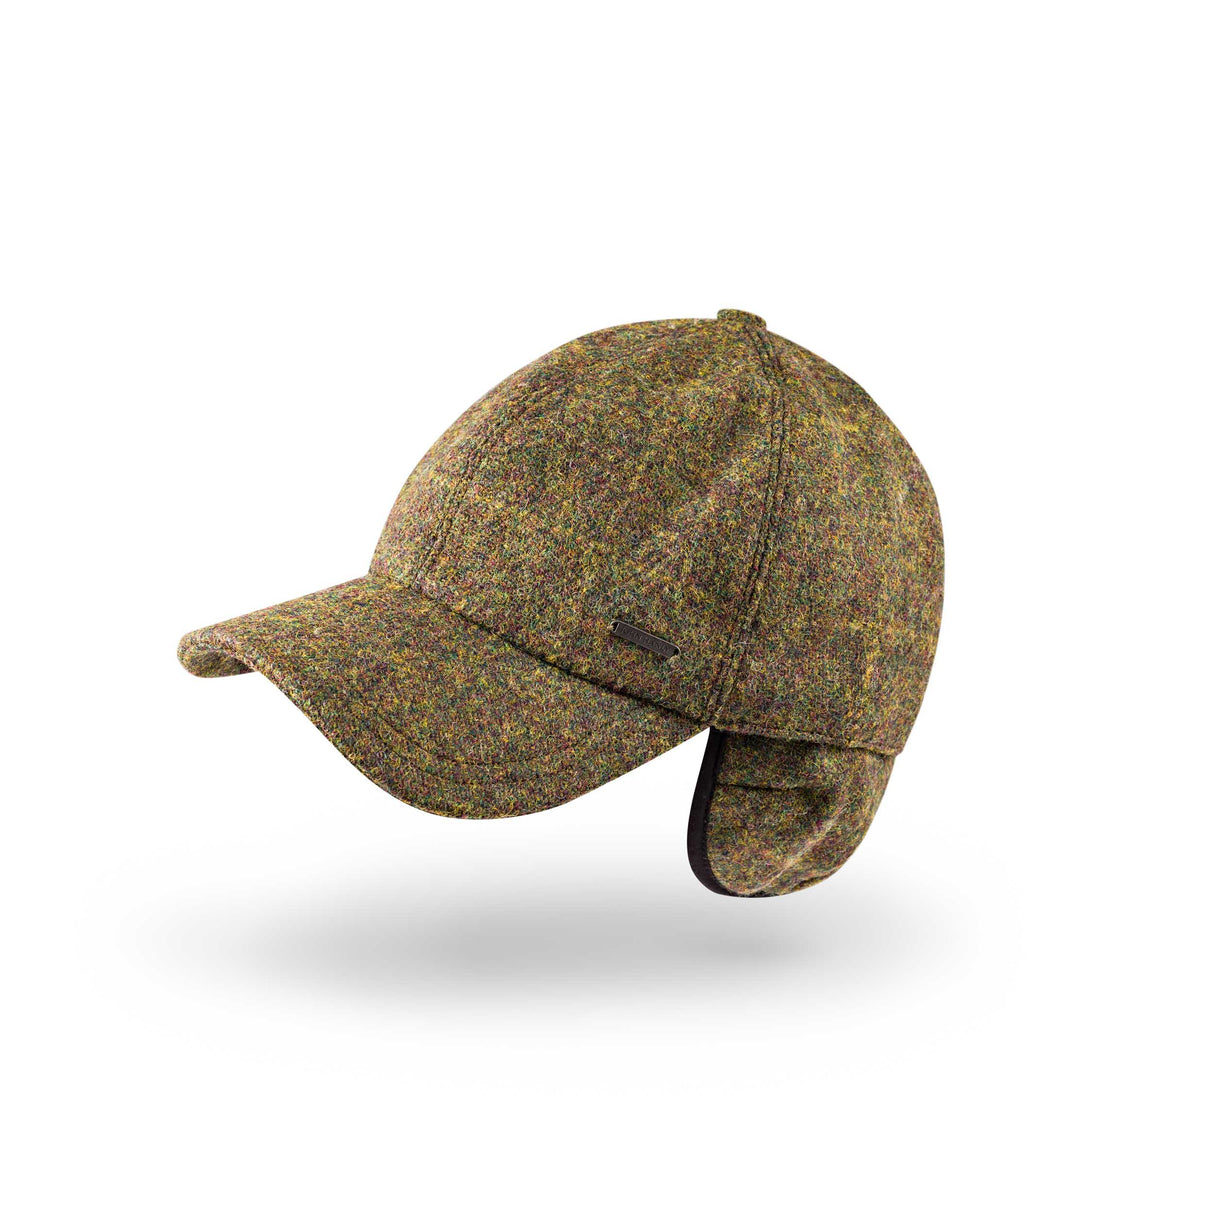 Tweed Baseball Style Cap with Earflaps Dark Green and Black Herringbone with Red and Blue Overcheck - John Hanly - X-Large